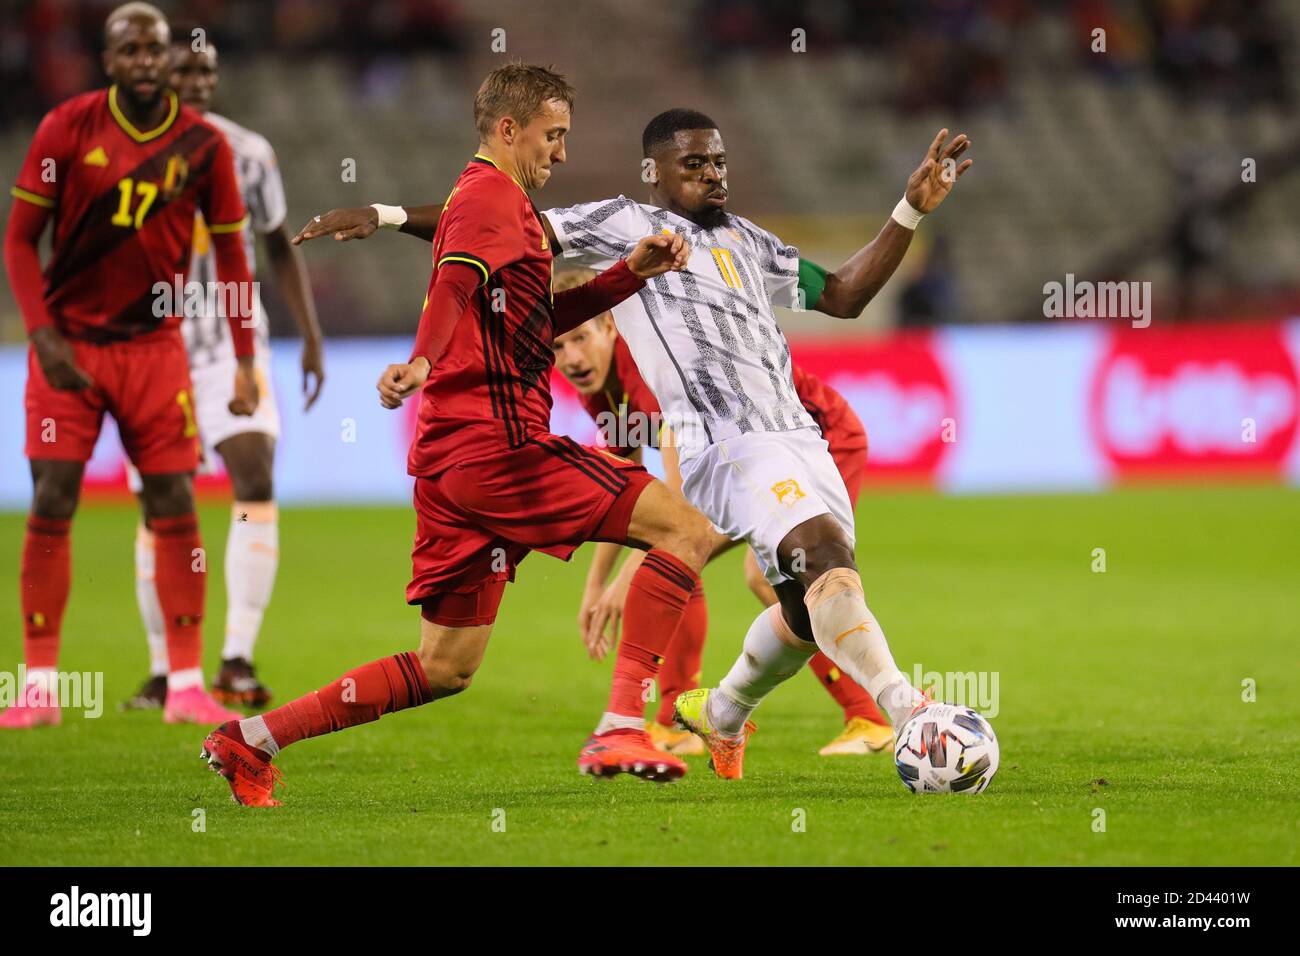 Brussels, Belgium. 8th Oct, 2020. Serge Aurier (R) of Cote d'Ivoire vies with Timothy Castagne of Belgium during a friendly match between Belgium and Cote d'Ivoire at the King Baudouin Stadium in Brussels, Belgium, Oct. 8, 2020. Credit: Zheng Huansong/Xinhua/Alamy Live News Stock Photo